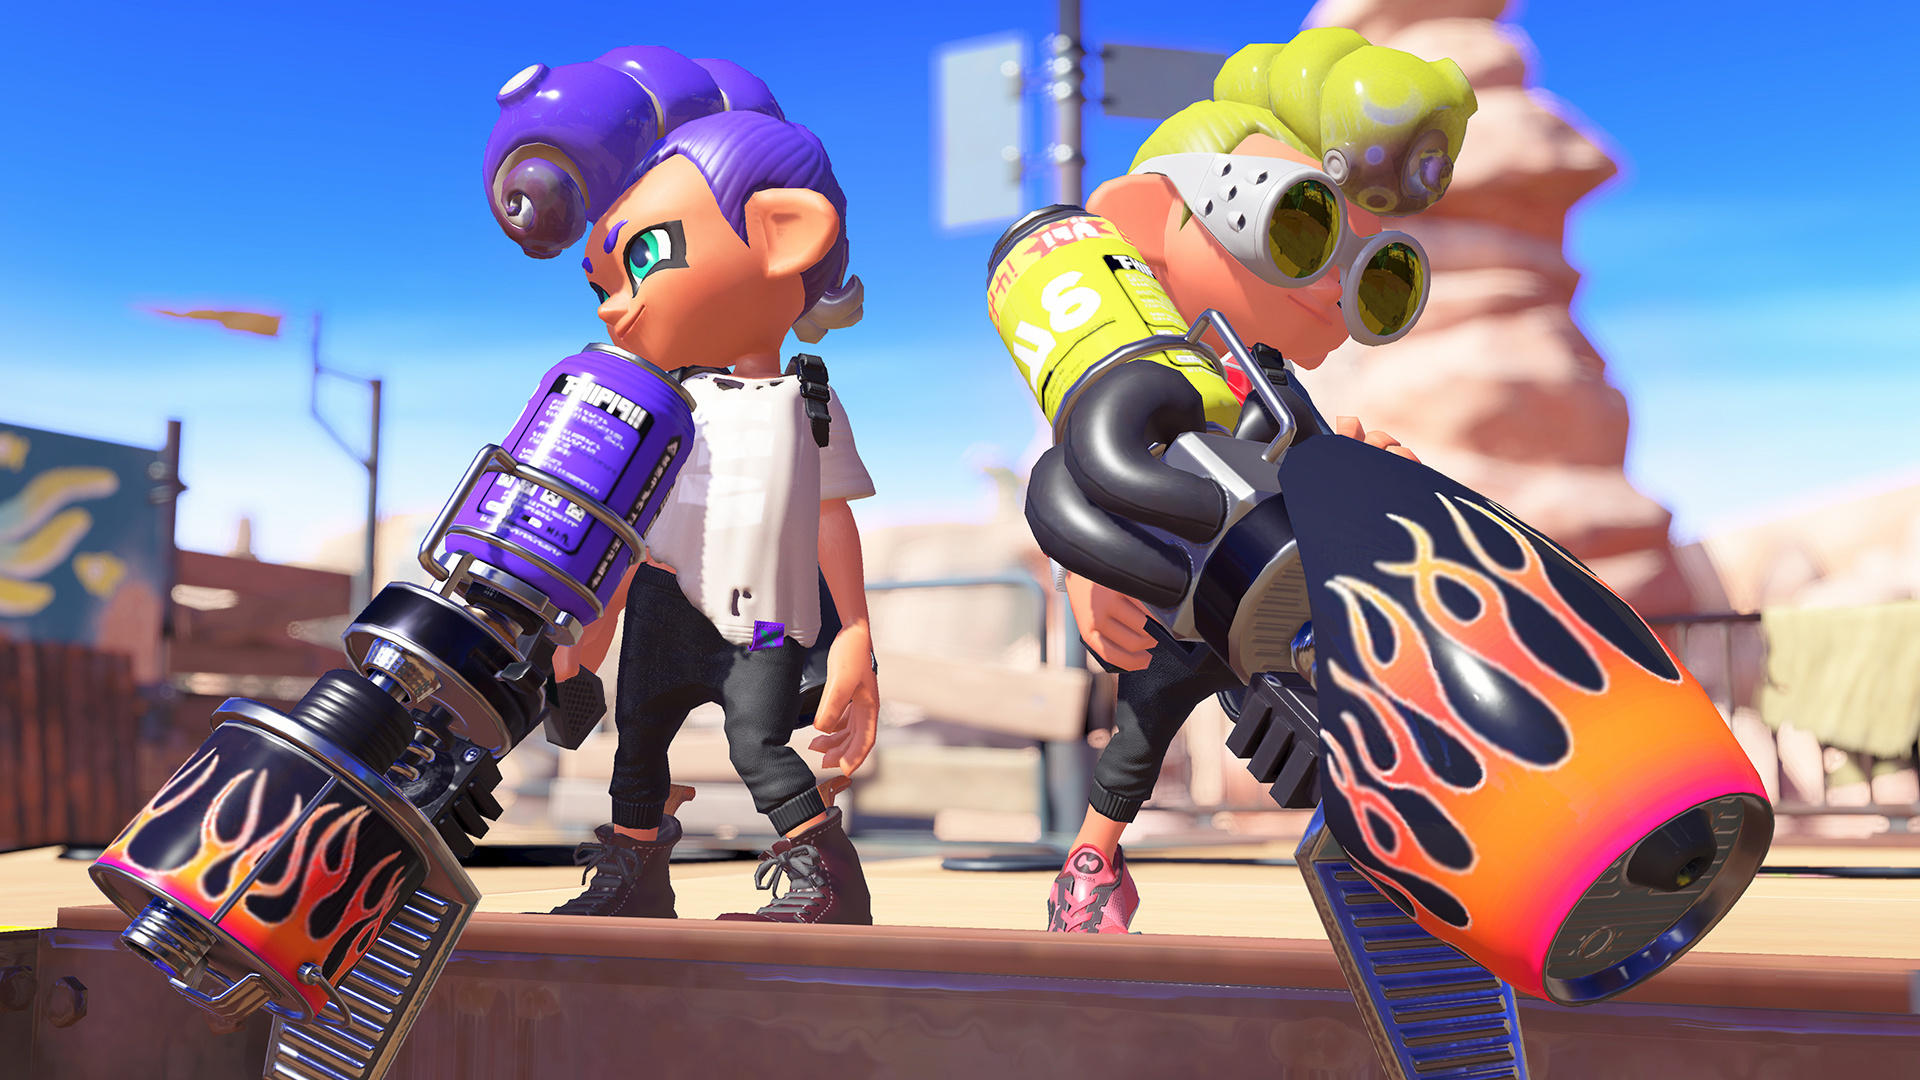 Splatoon 3: A game for Nintendo Switch, Producer: Hisashi Nogami. 1920x1080 Full HD Wallpaper.